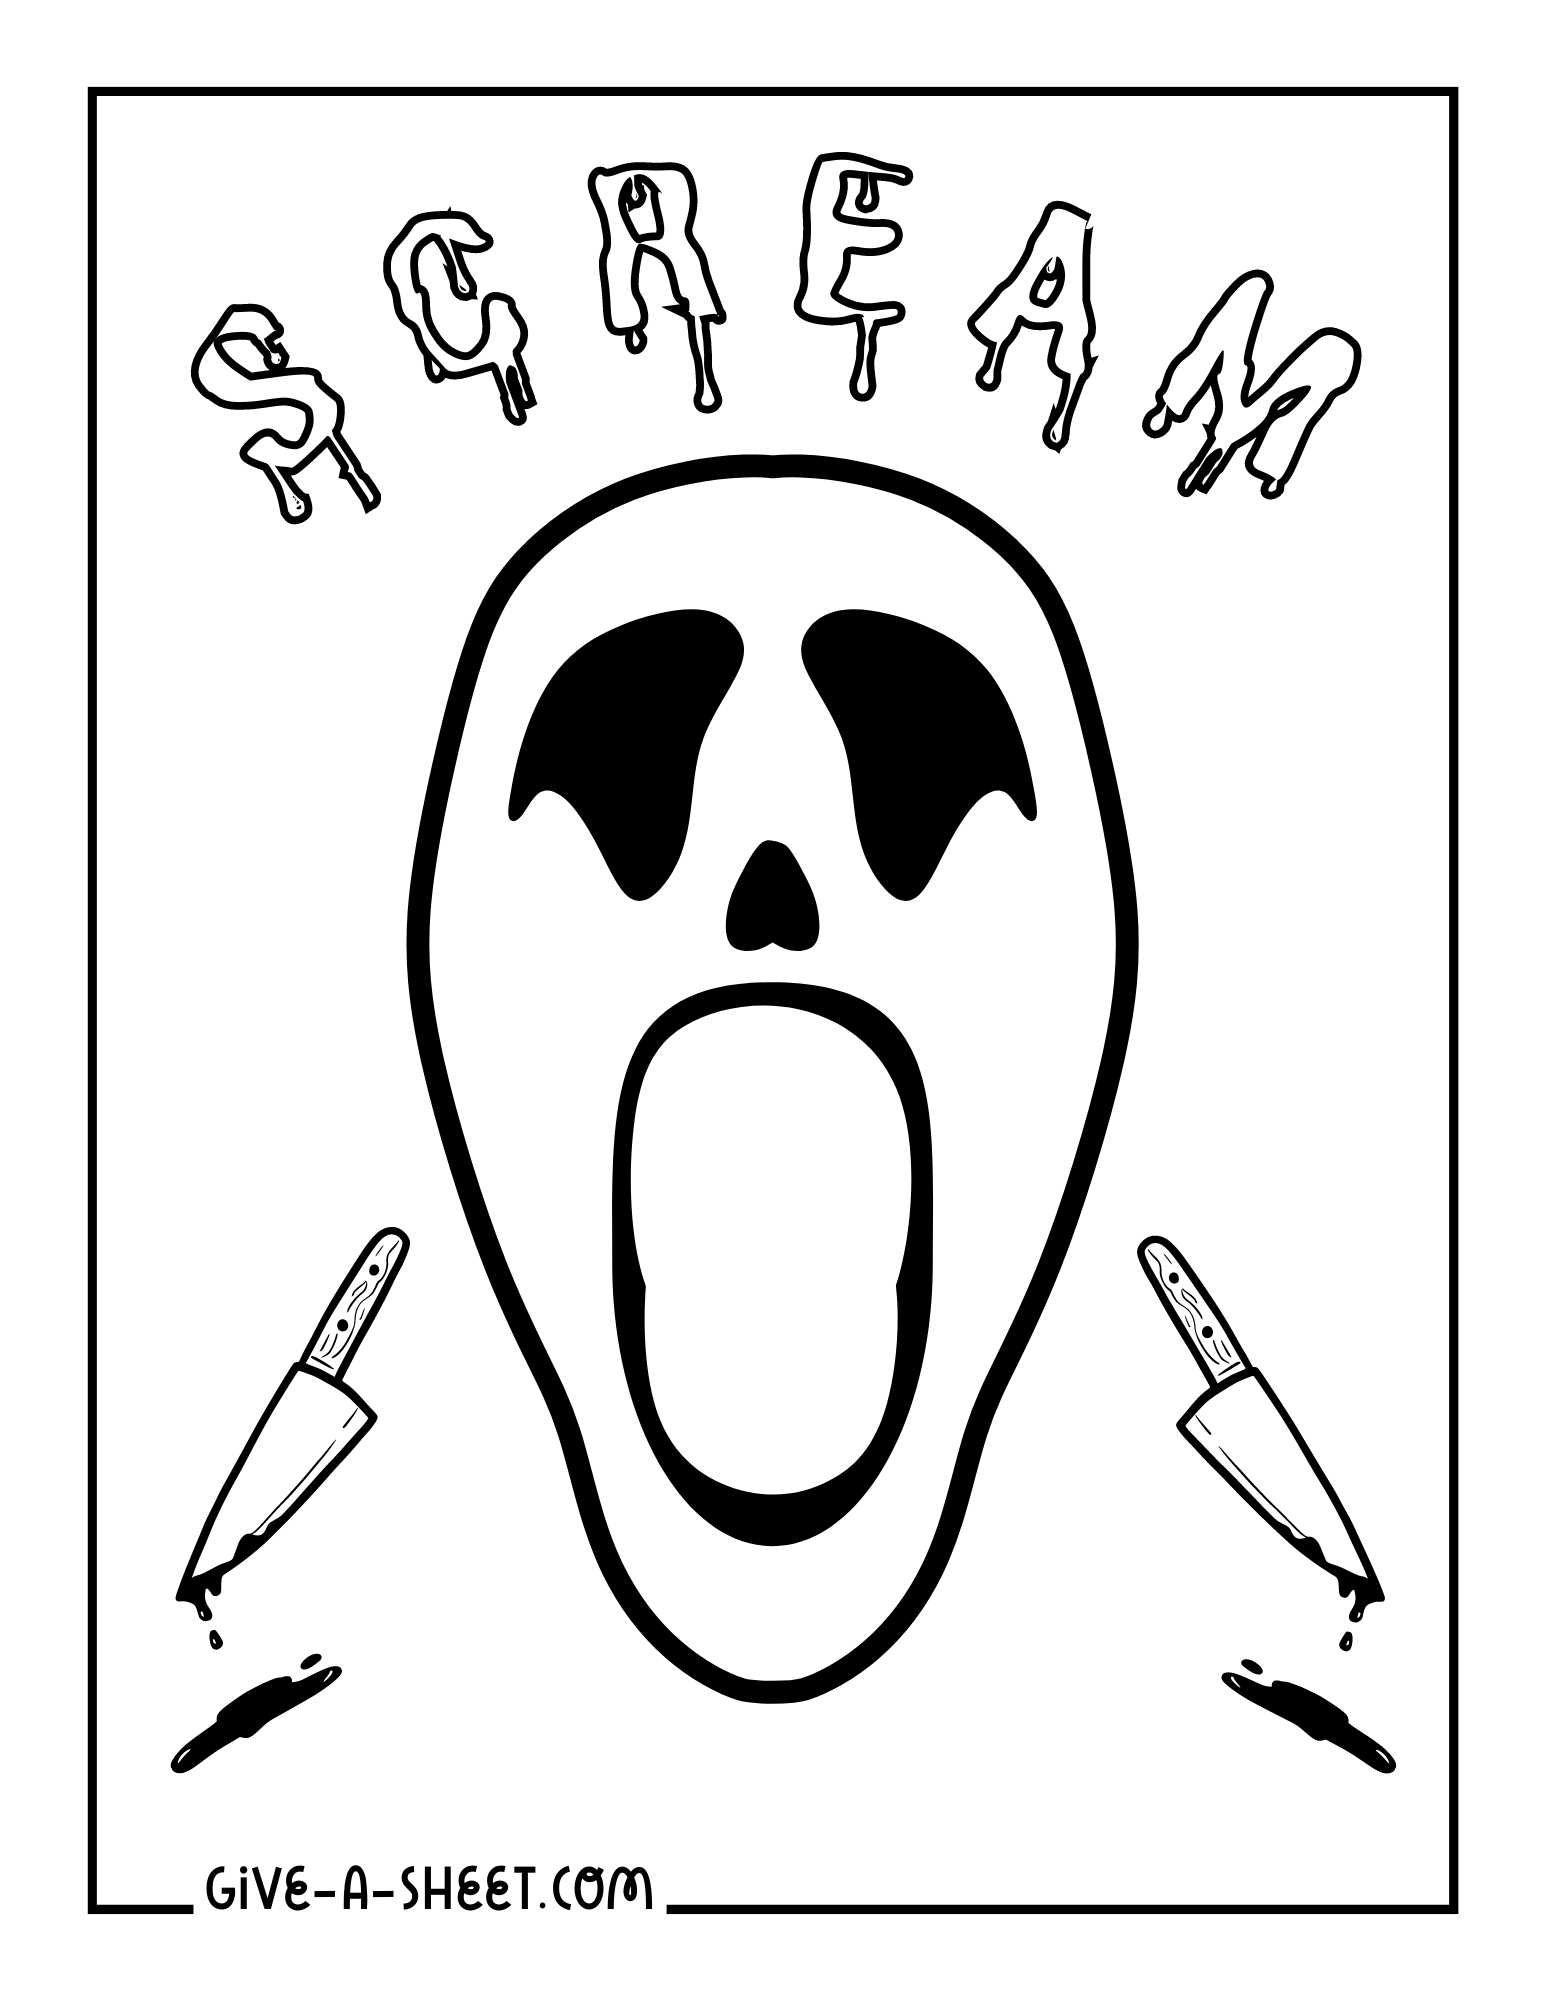 Ghostface scream scary movies illustrations coloring sheet.